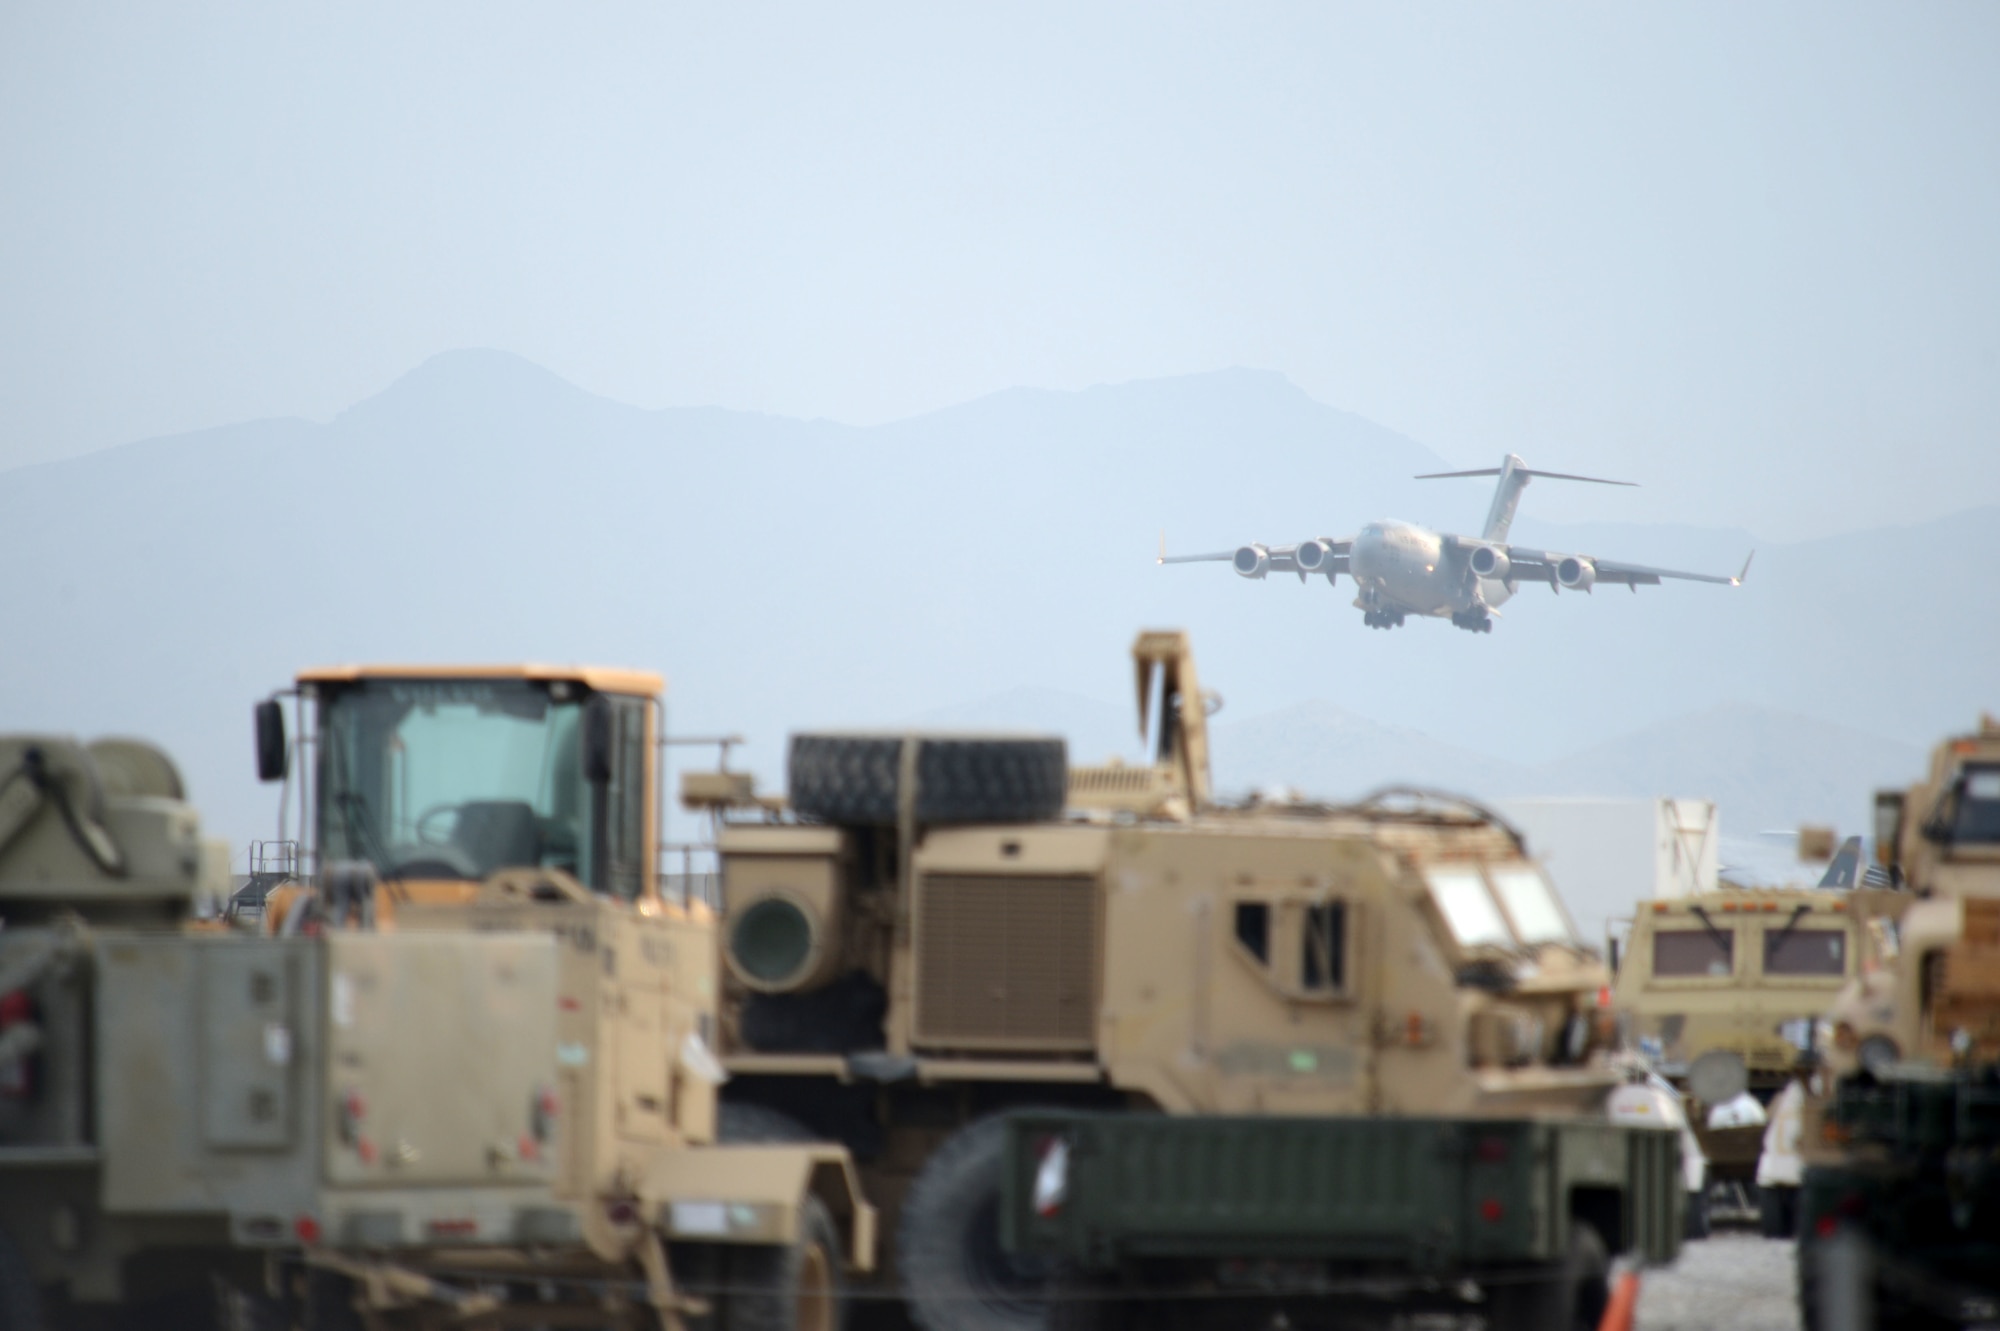 A C-17 Globemaster III aircraft deployed from McChord Airfield, Wash., descends for landing at Bagram Air Field, Afghanistan, Nov. 2, 2014. The men and women of Bagram Air Field service the Department of Defense’s busiest single runway. Airmen and civilian contractors work 24 hours a day, seven days a week to ensure airfield operations are successfully accomplished. (U.S. Air Force photo by Master Sgt. Cohen A. Young/Released)